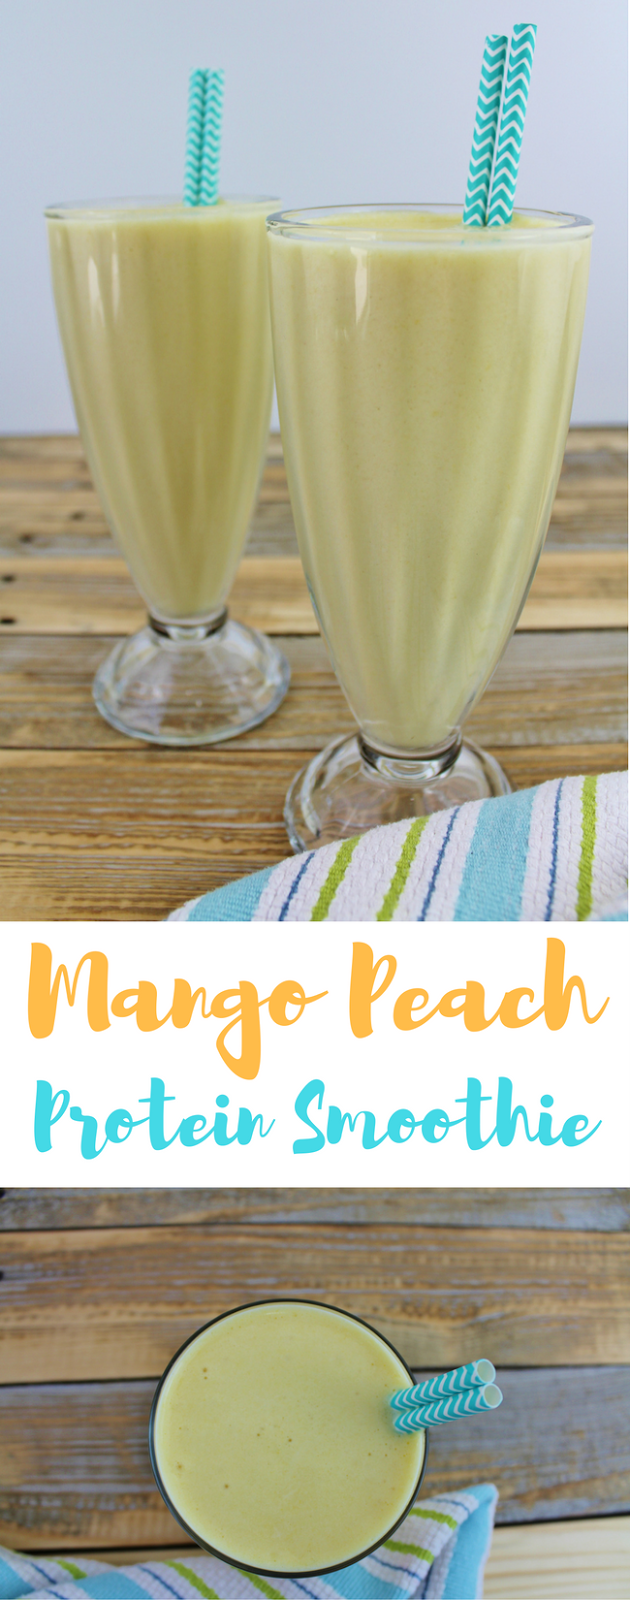 Mango Peach Protein Smoothie. Delicious and feels completely indulgent, but gluten-free and completely clean.